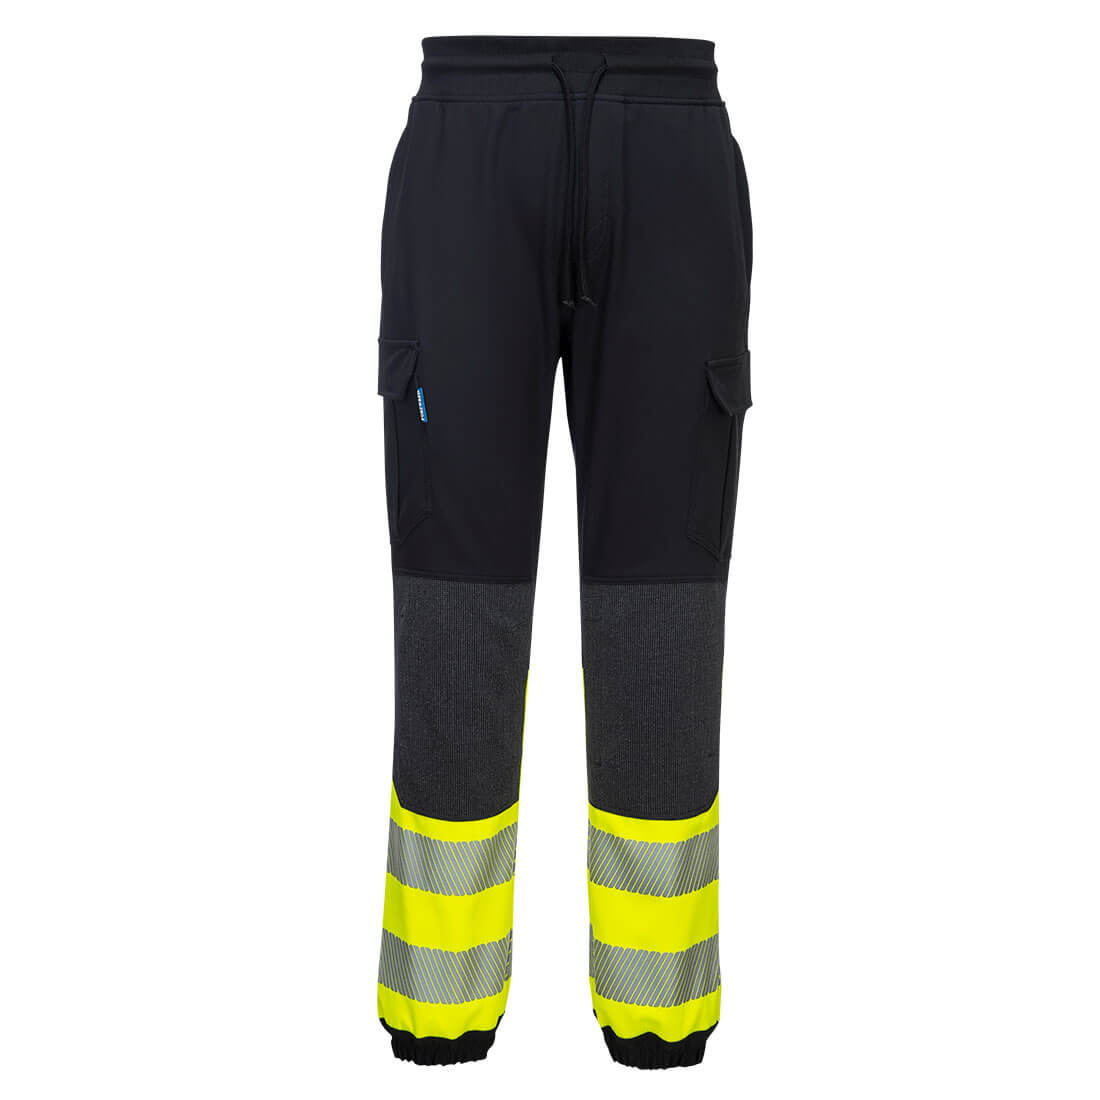 Hi-Vis Soft Trousers with Extremely Comfort and Flexibility